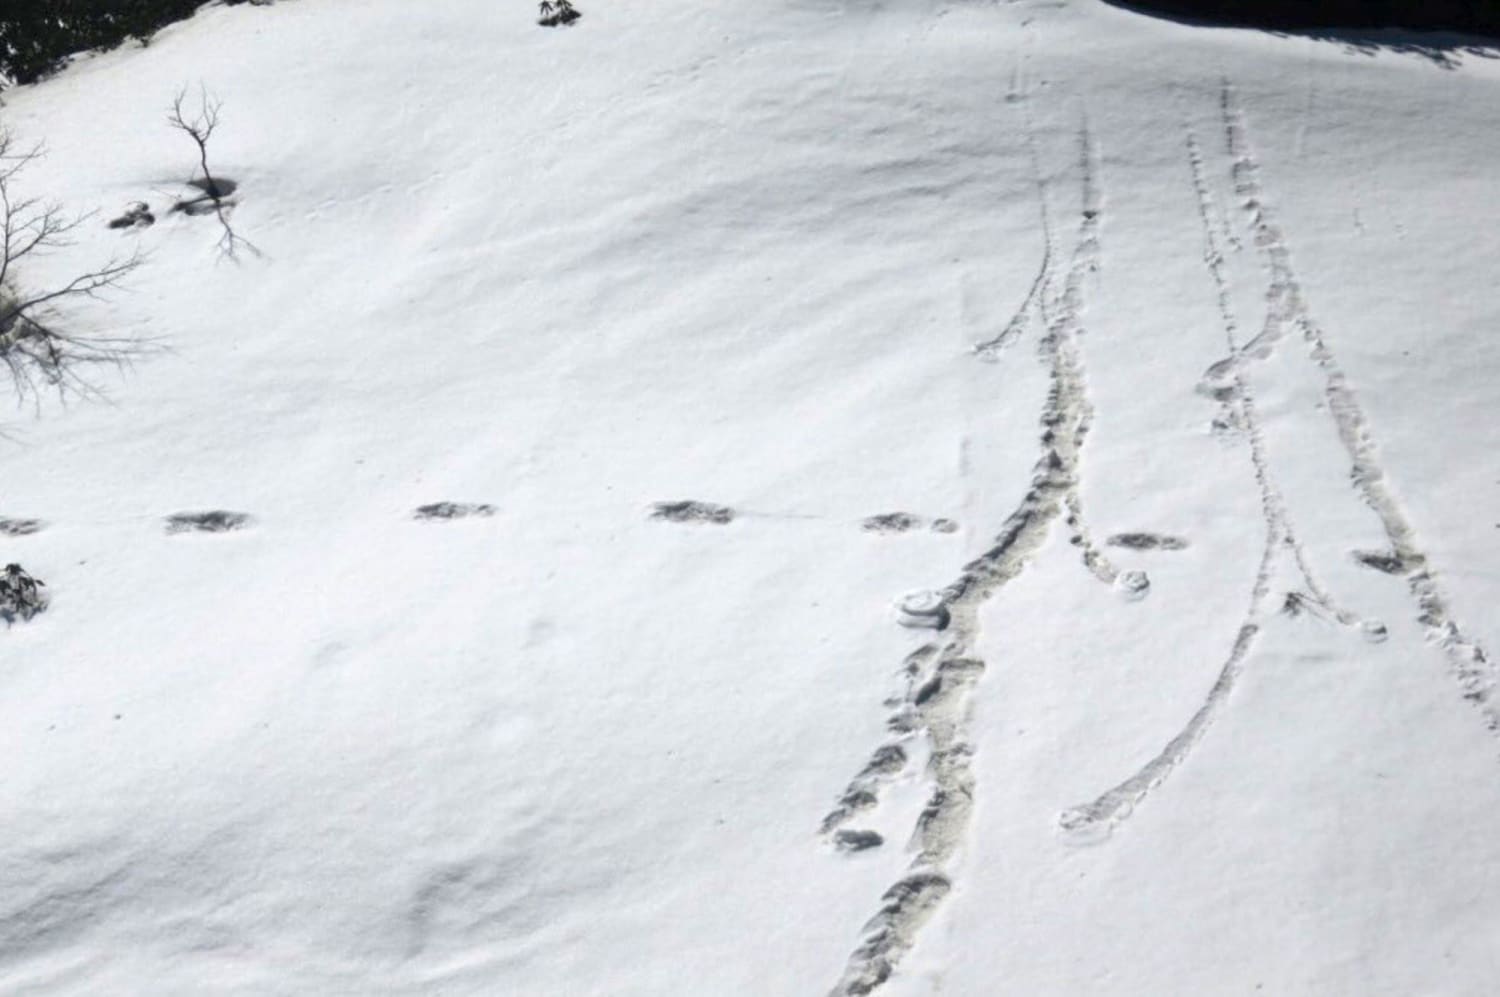 Indian army says it found yeti footprints in the Himalayas